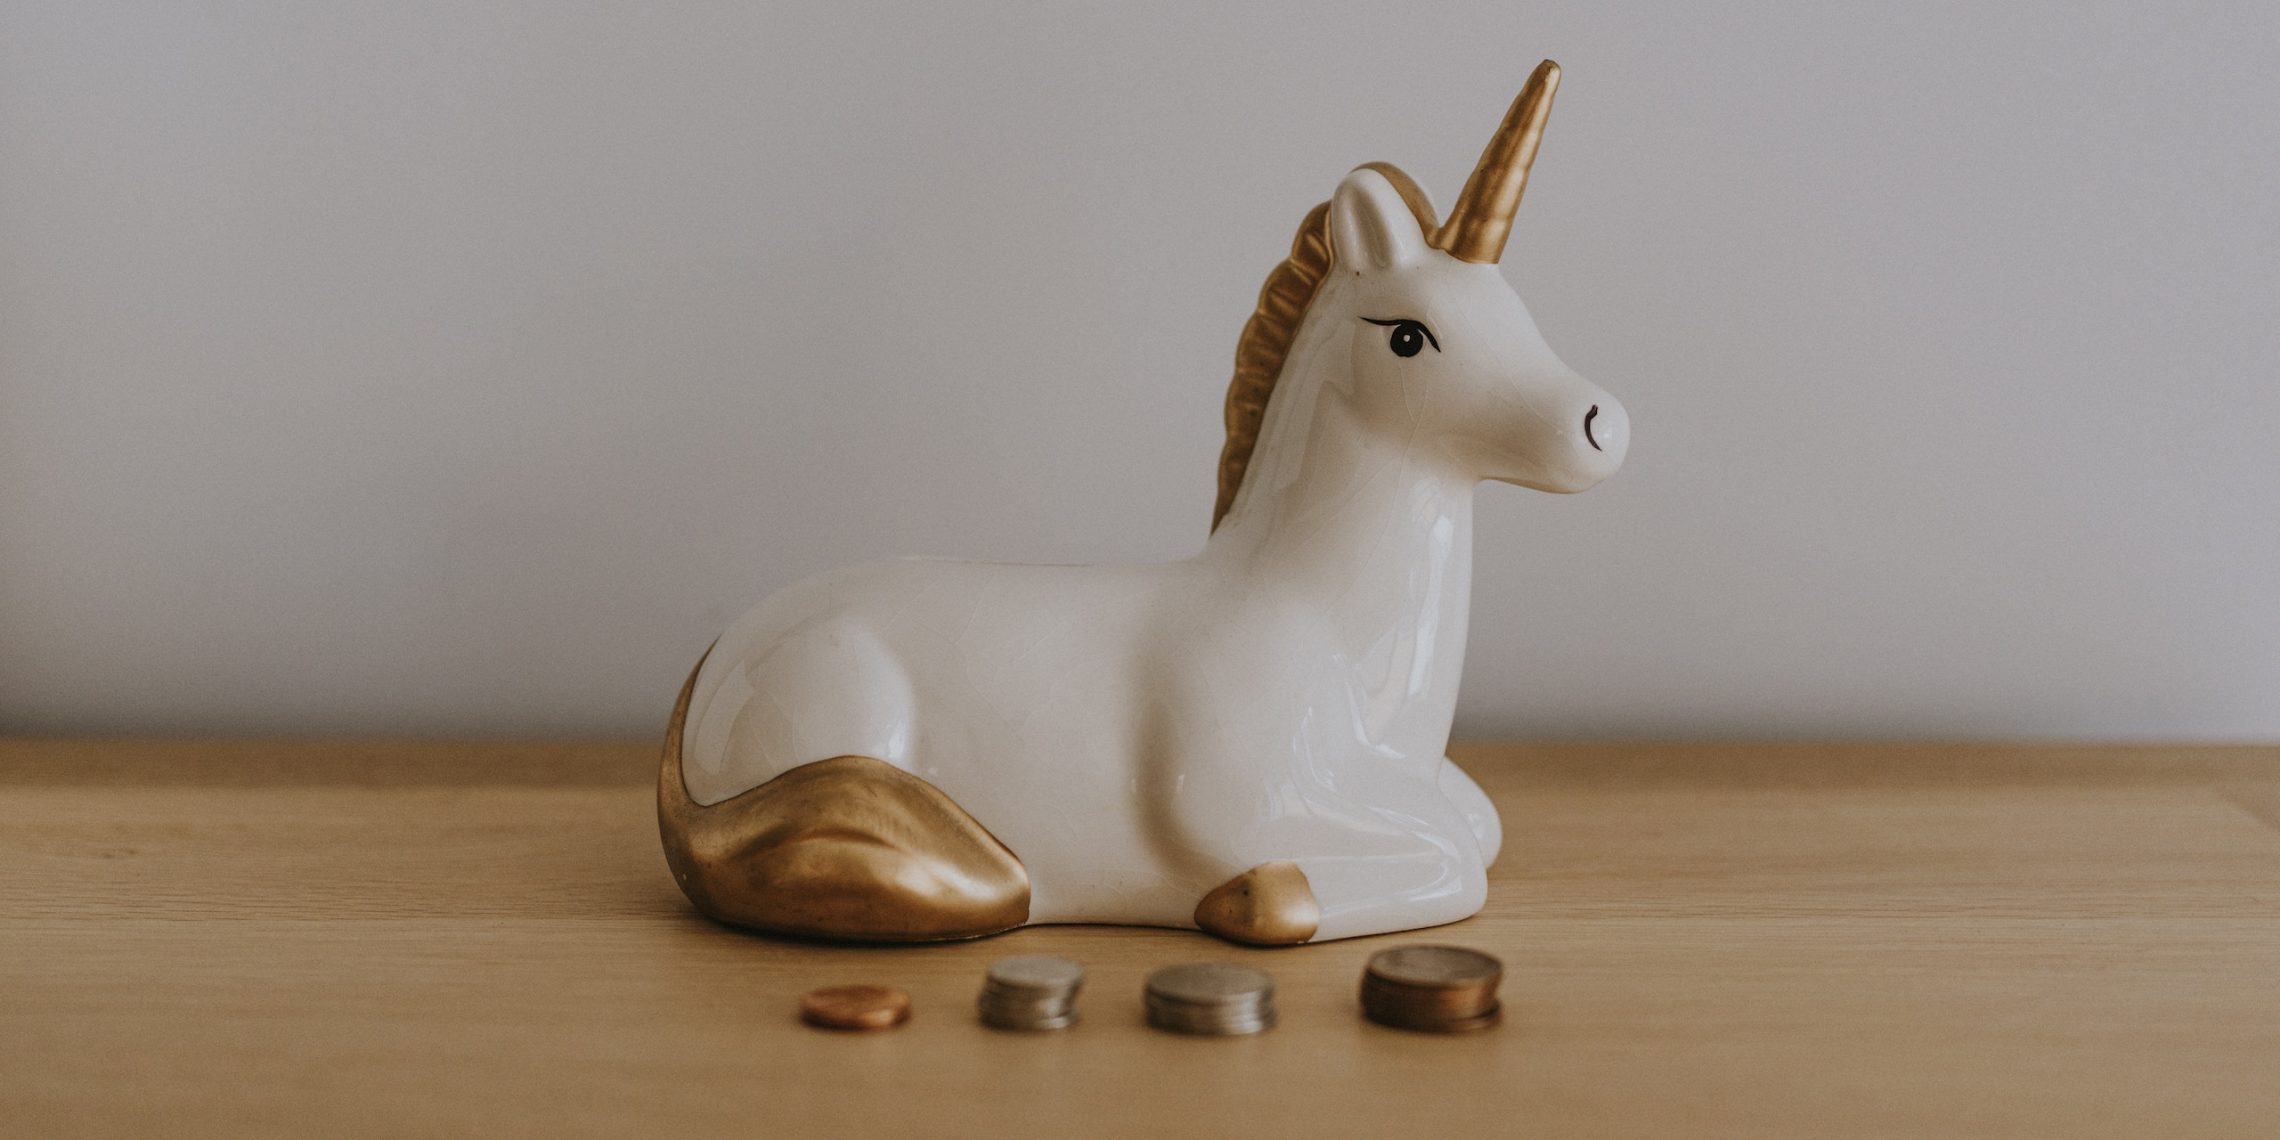 unicorn "piggy" bank on a desk with several stacks of coints